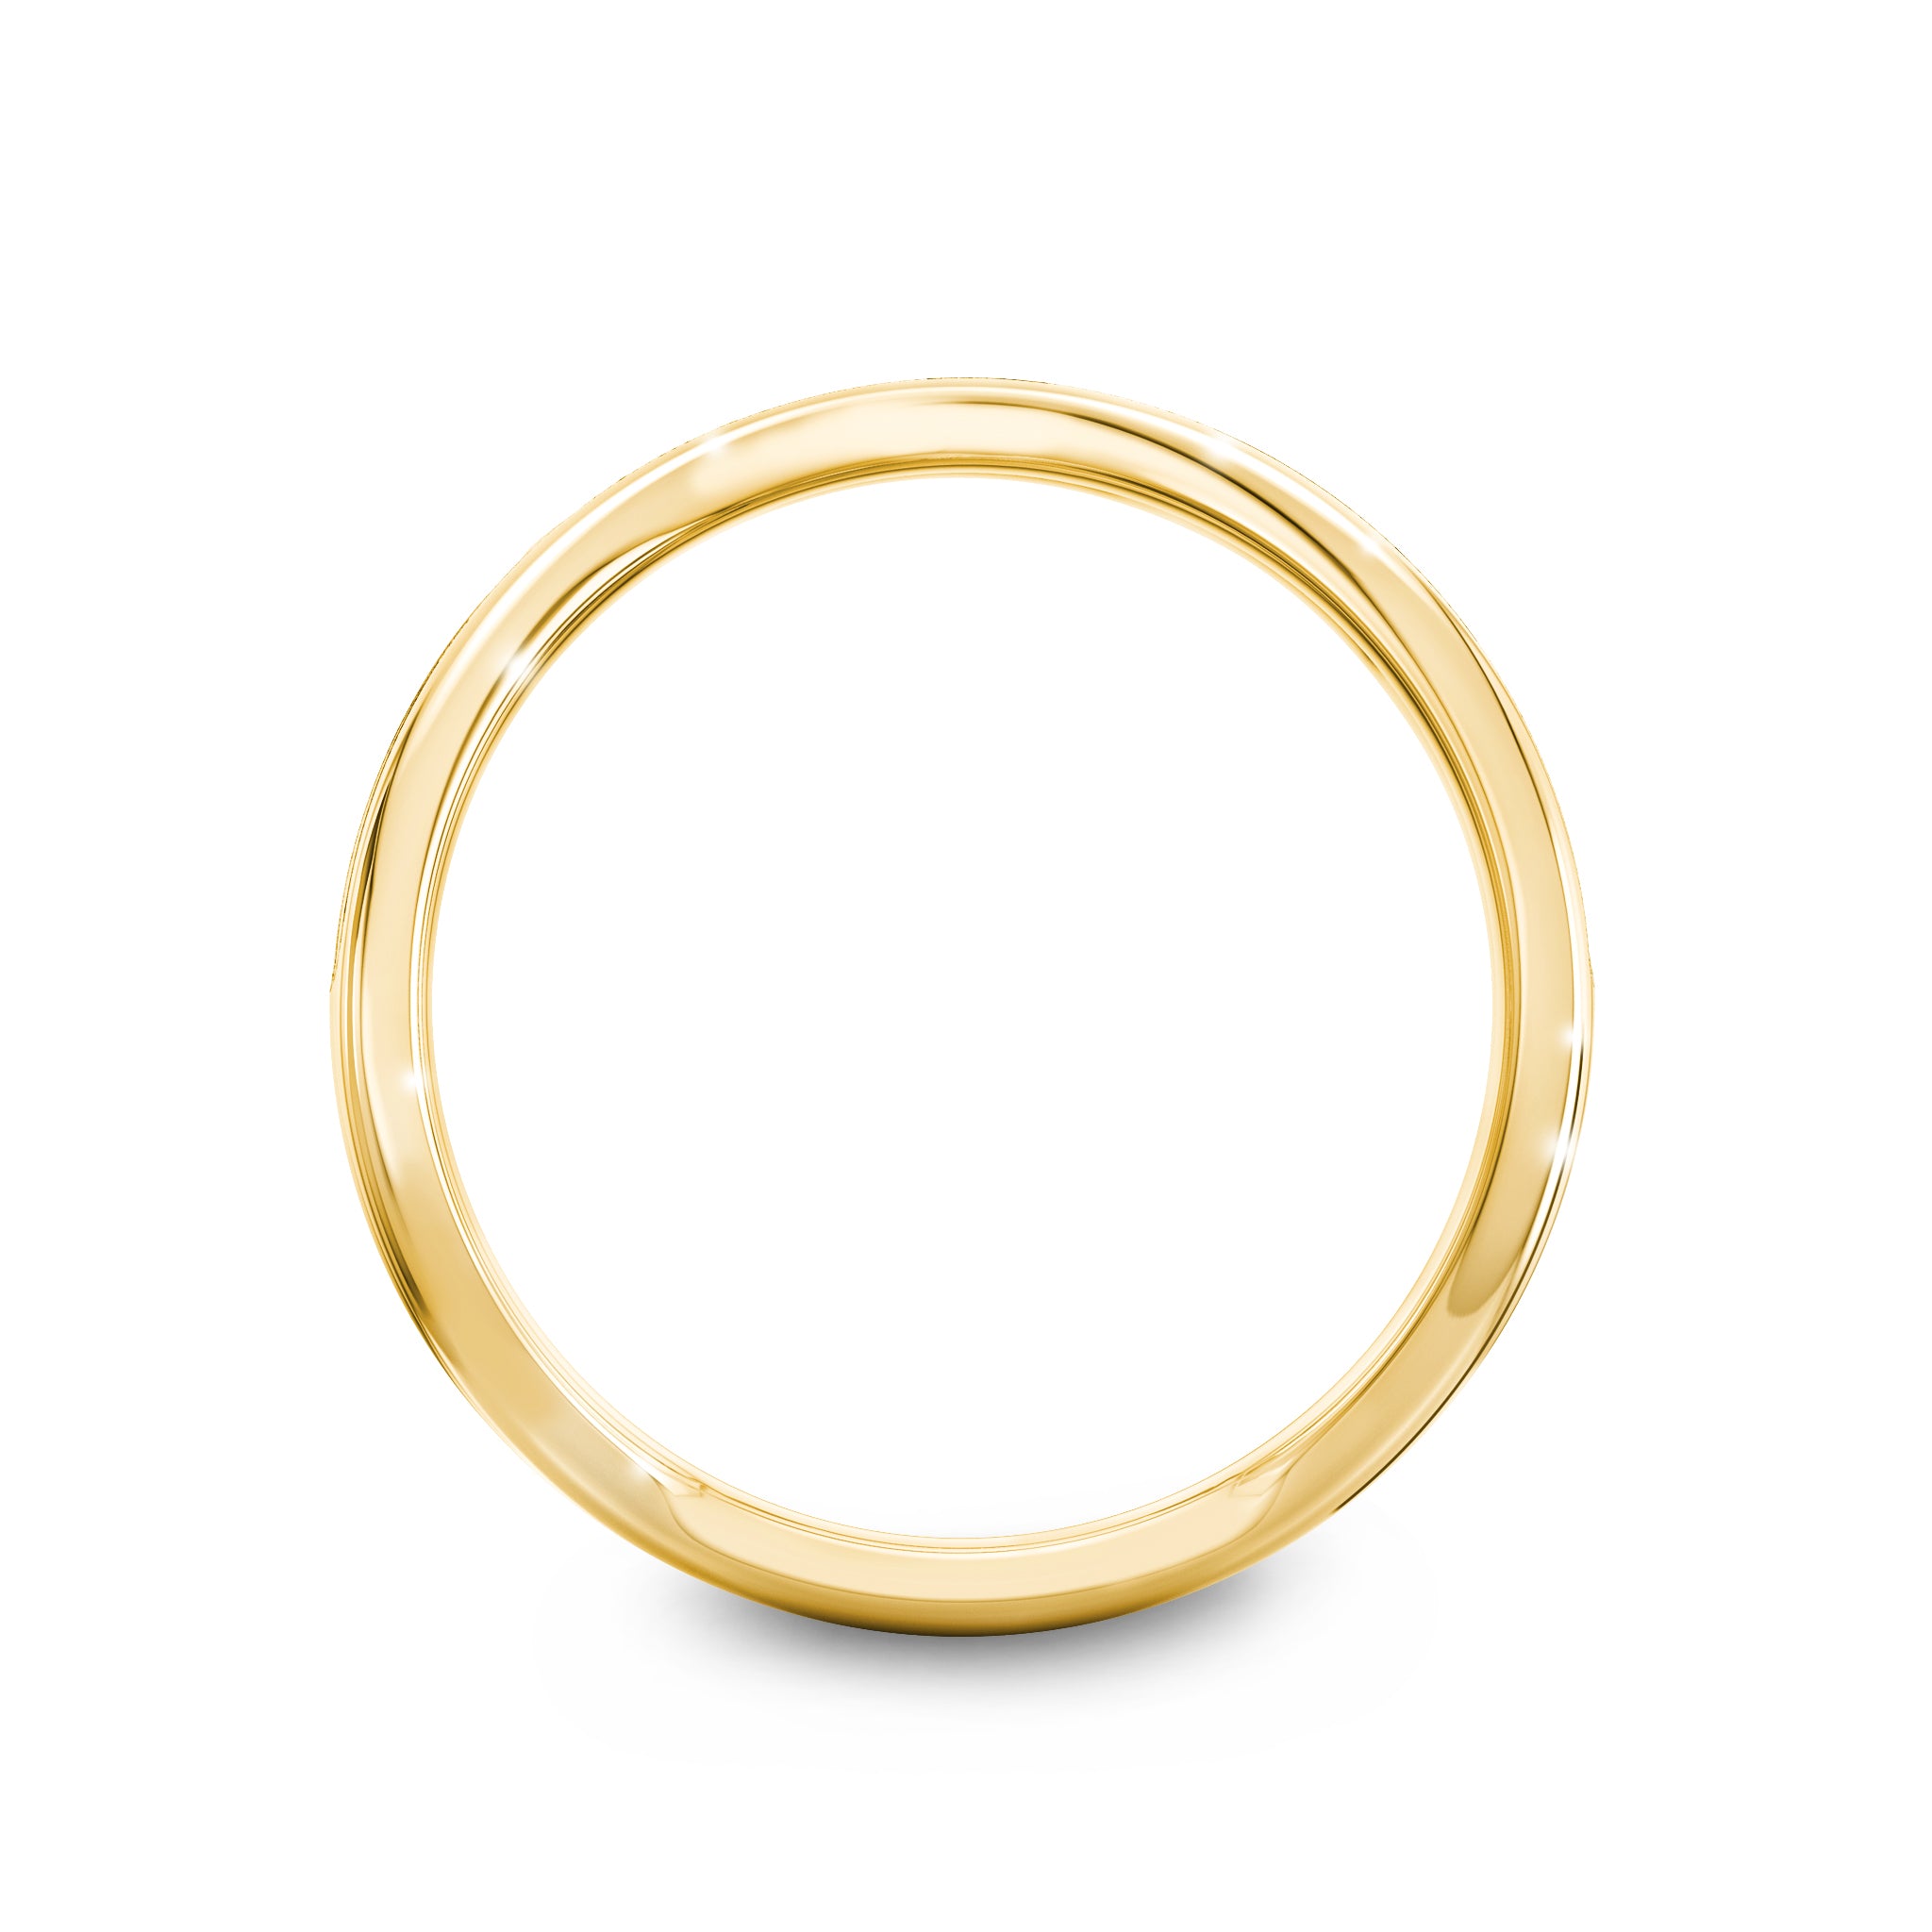 Cape Town Ring in 14k yellow Gold 